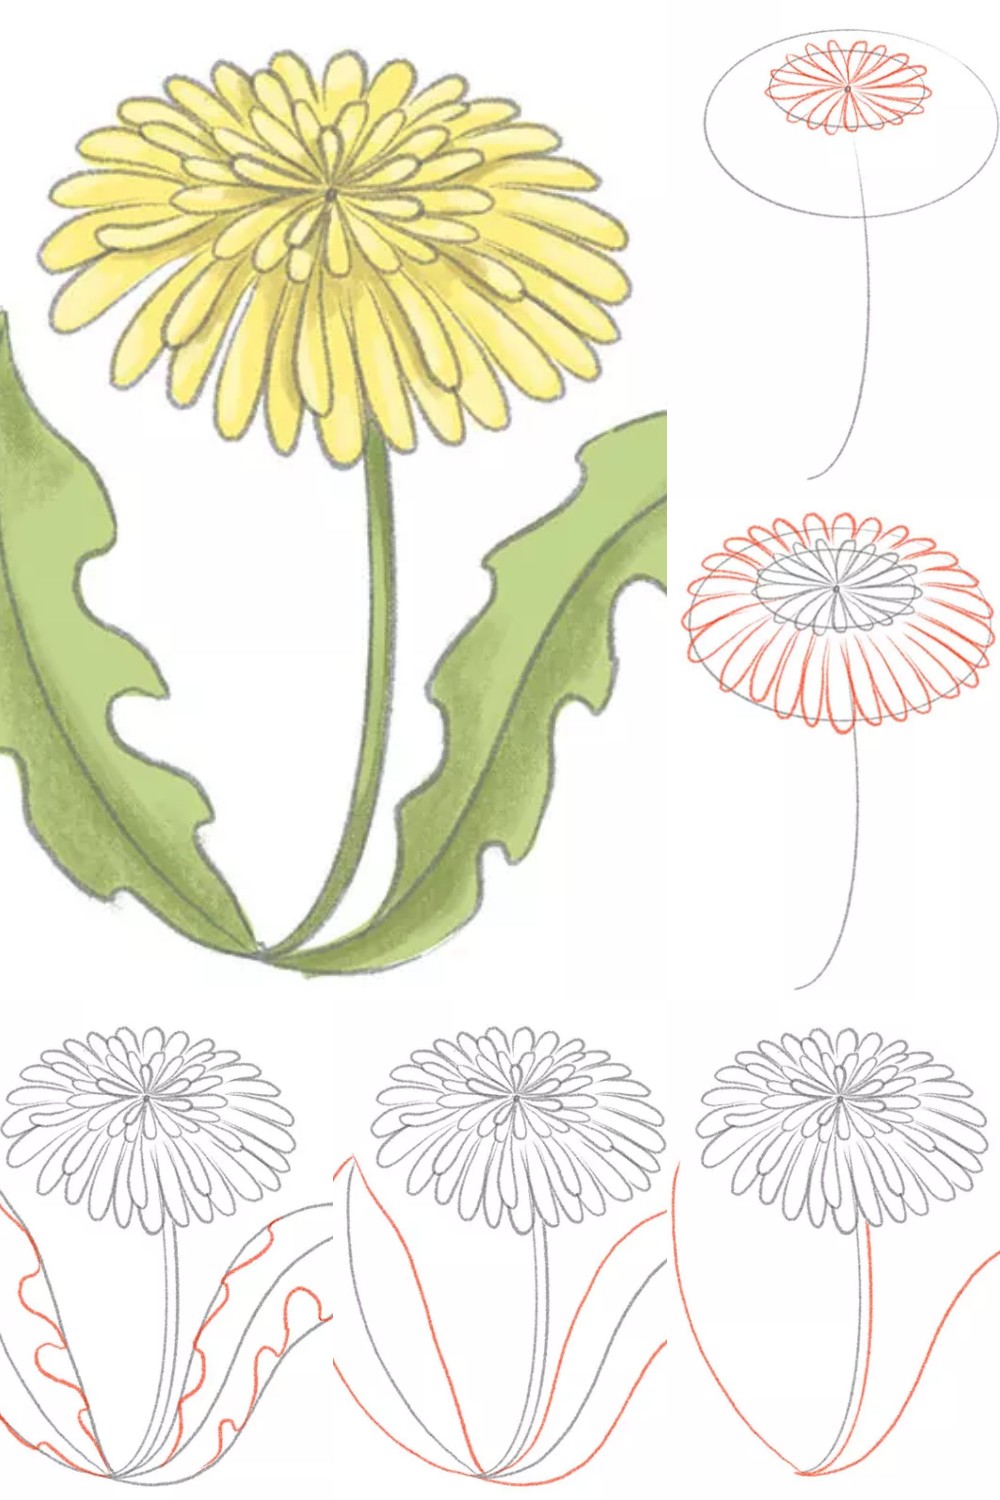 How to Draw a Dandelion